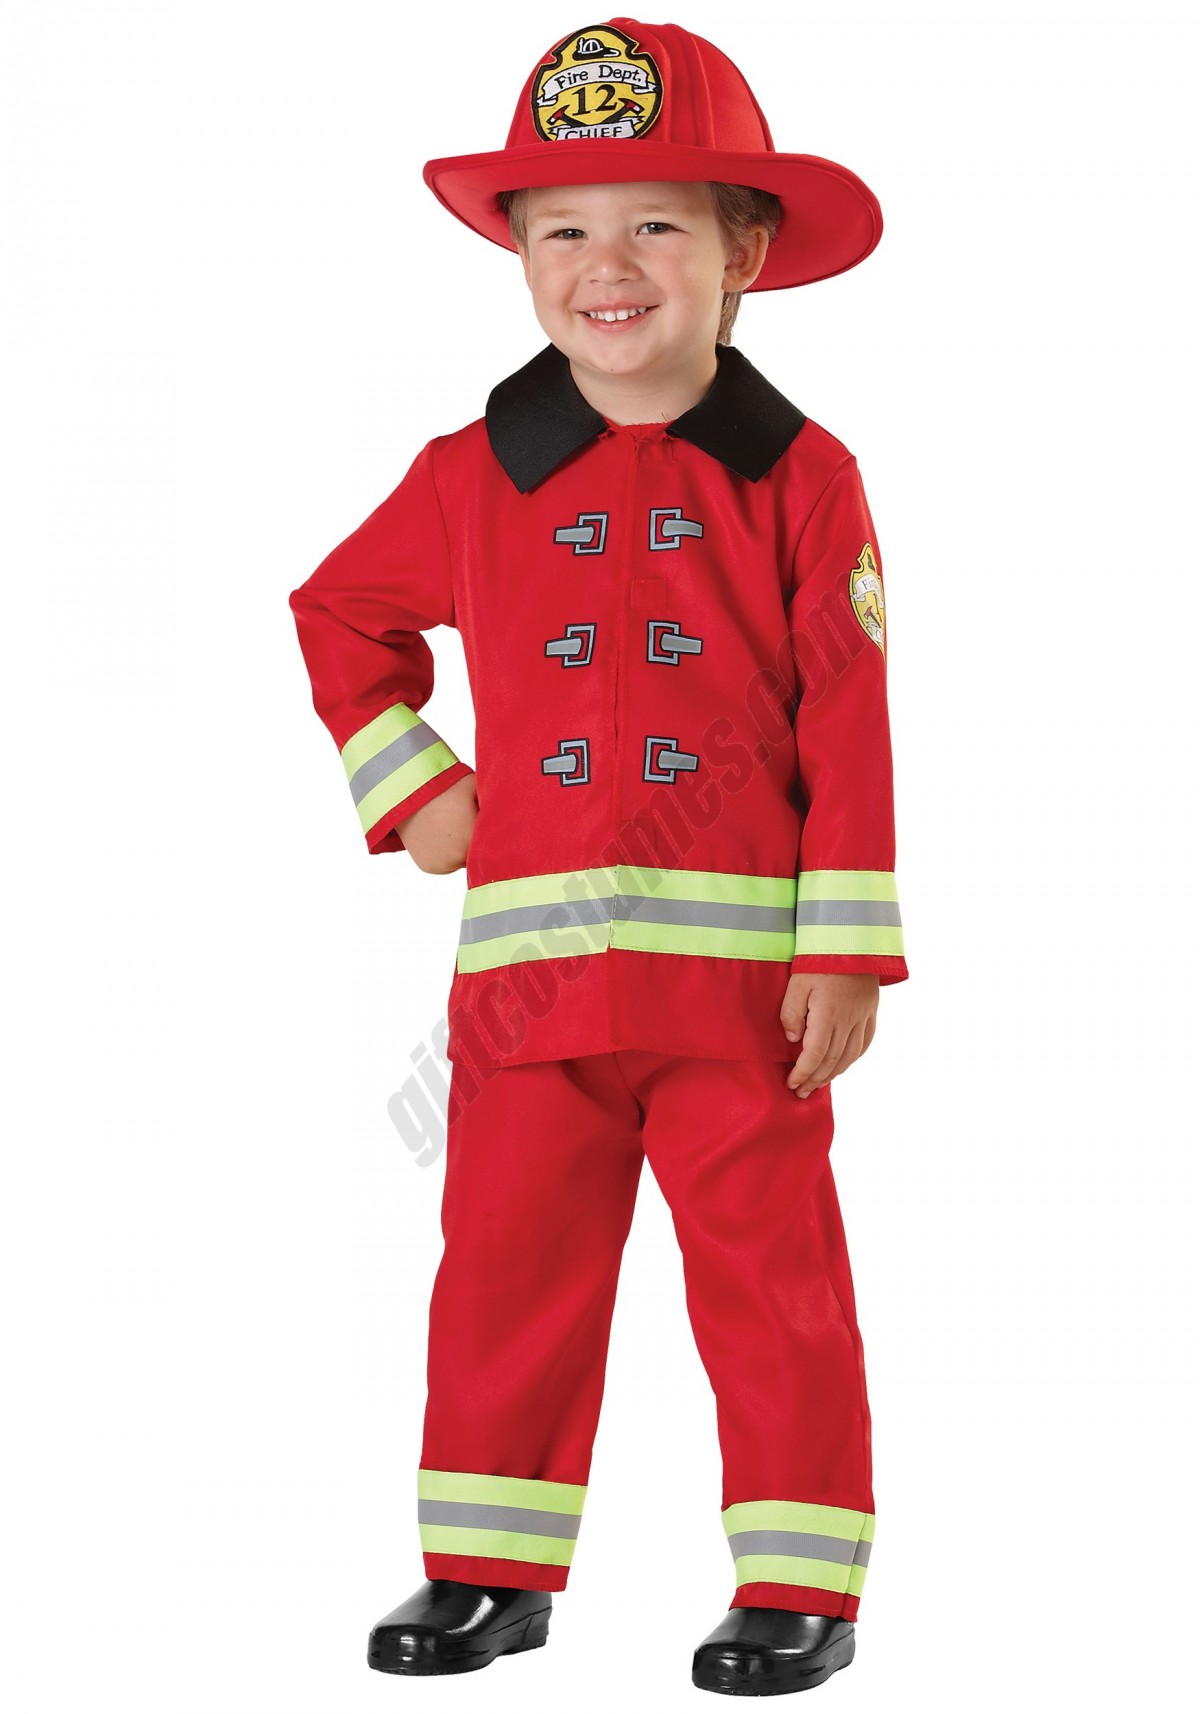 Toddler Fireman Costume Promotions - -0